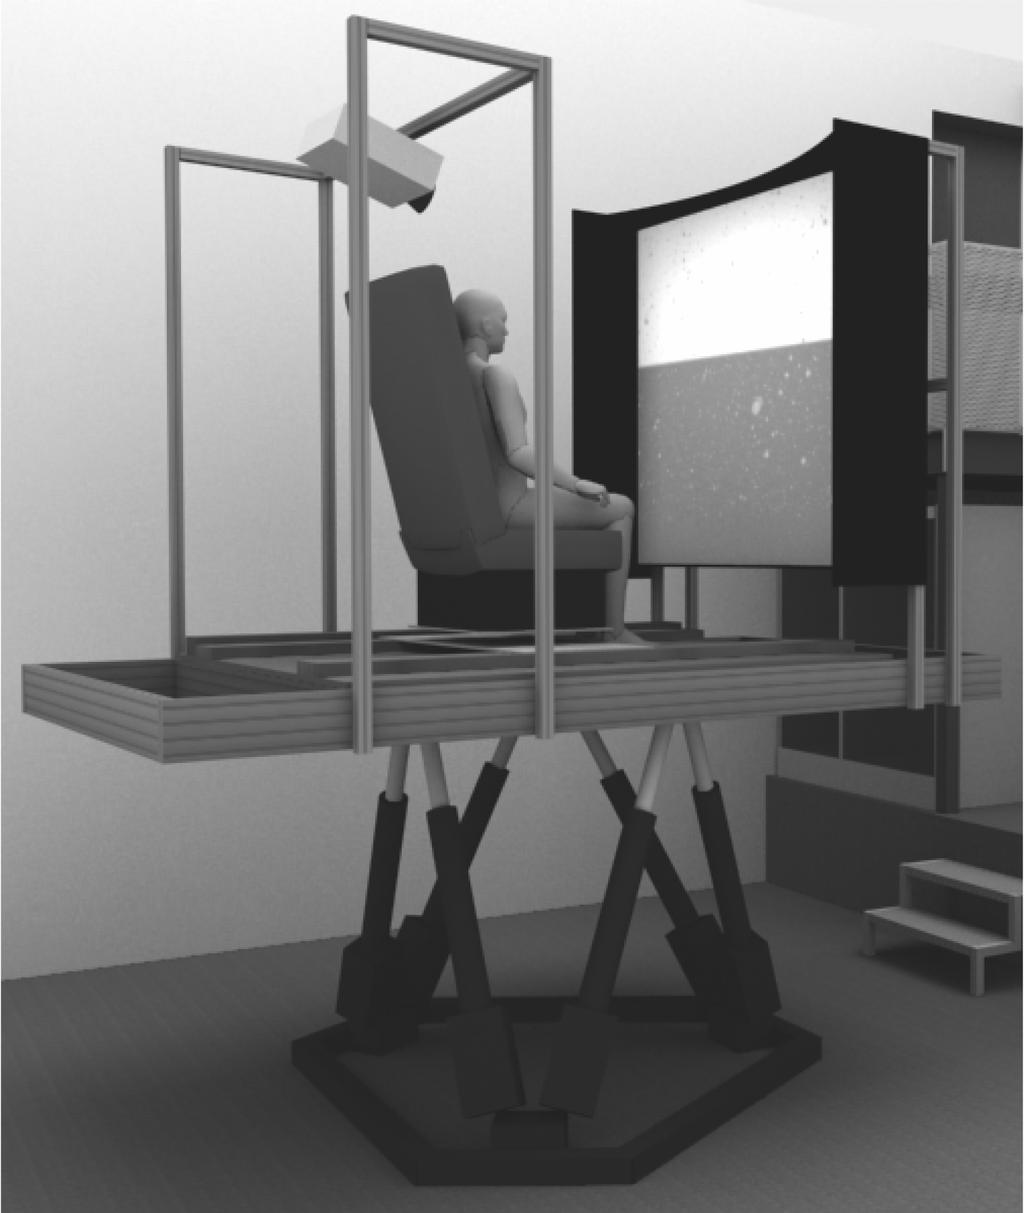 The MPI CyberMotion Simulator: A Novel Research Platform to Investigate Human Control Behavior are never able to completely simulate all of the motion cues experienced in a real vehicle [1, 2].